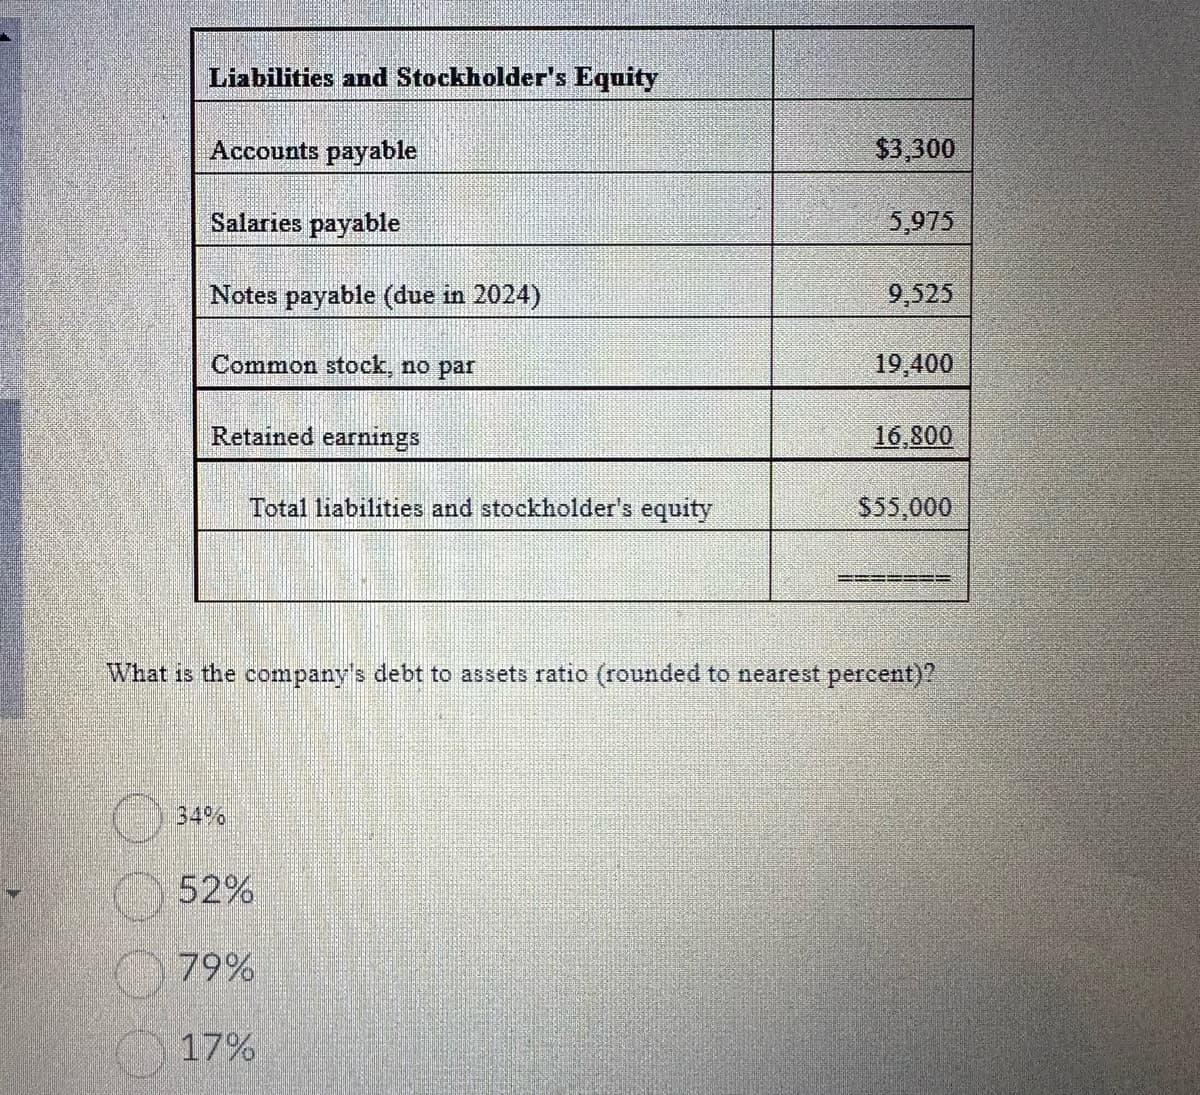 Liabilities and Stockholder's Equity
Accounts payable
Salaries payable
Notes payable (due in 2024)
Common stock, no par
Retained earnings
Total liabilities and stockholder's equity
34%
52%
79%
$3,300
17%
5,975
9,525
19,400
What is the company's debt to assets ratio (rounded to nearest percent)?
16,800
$55,000